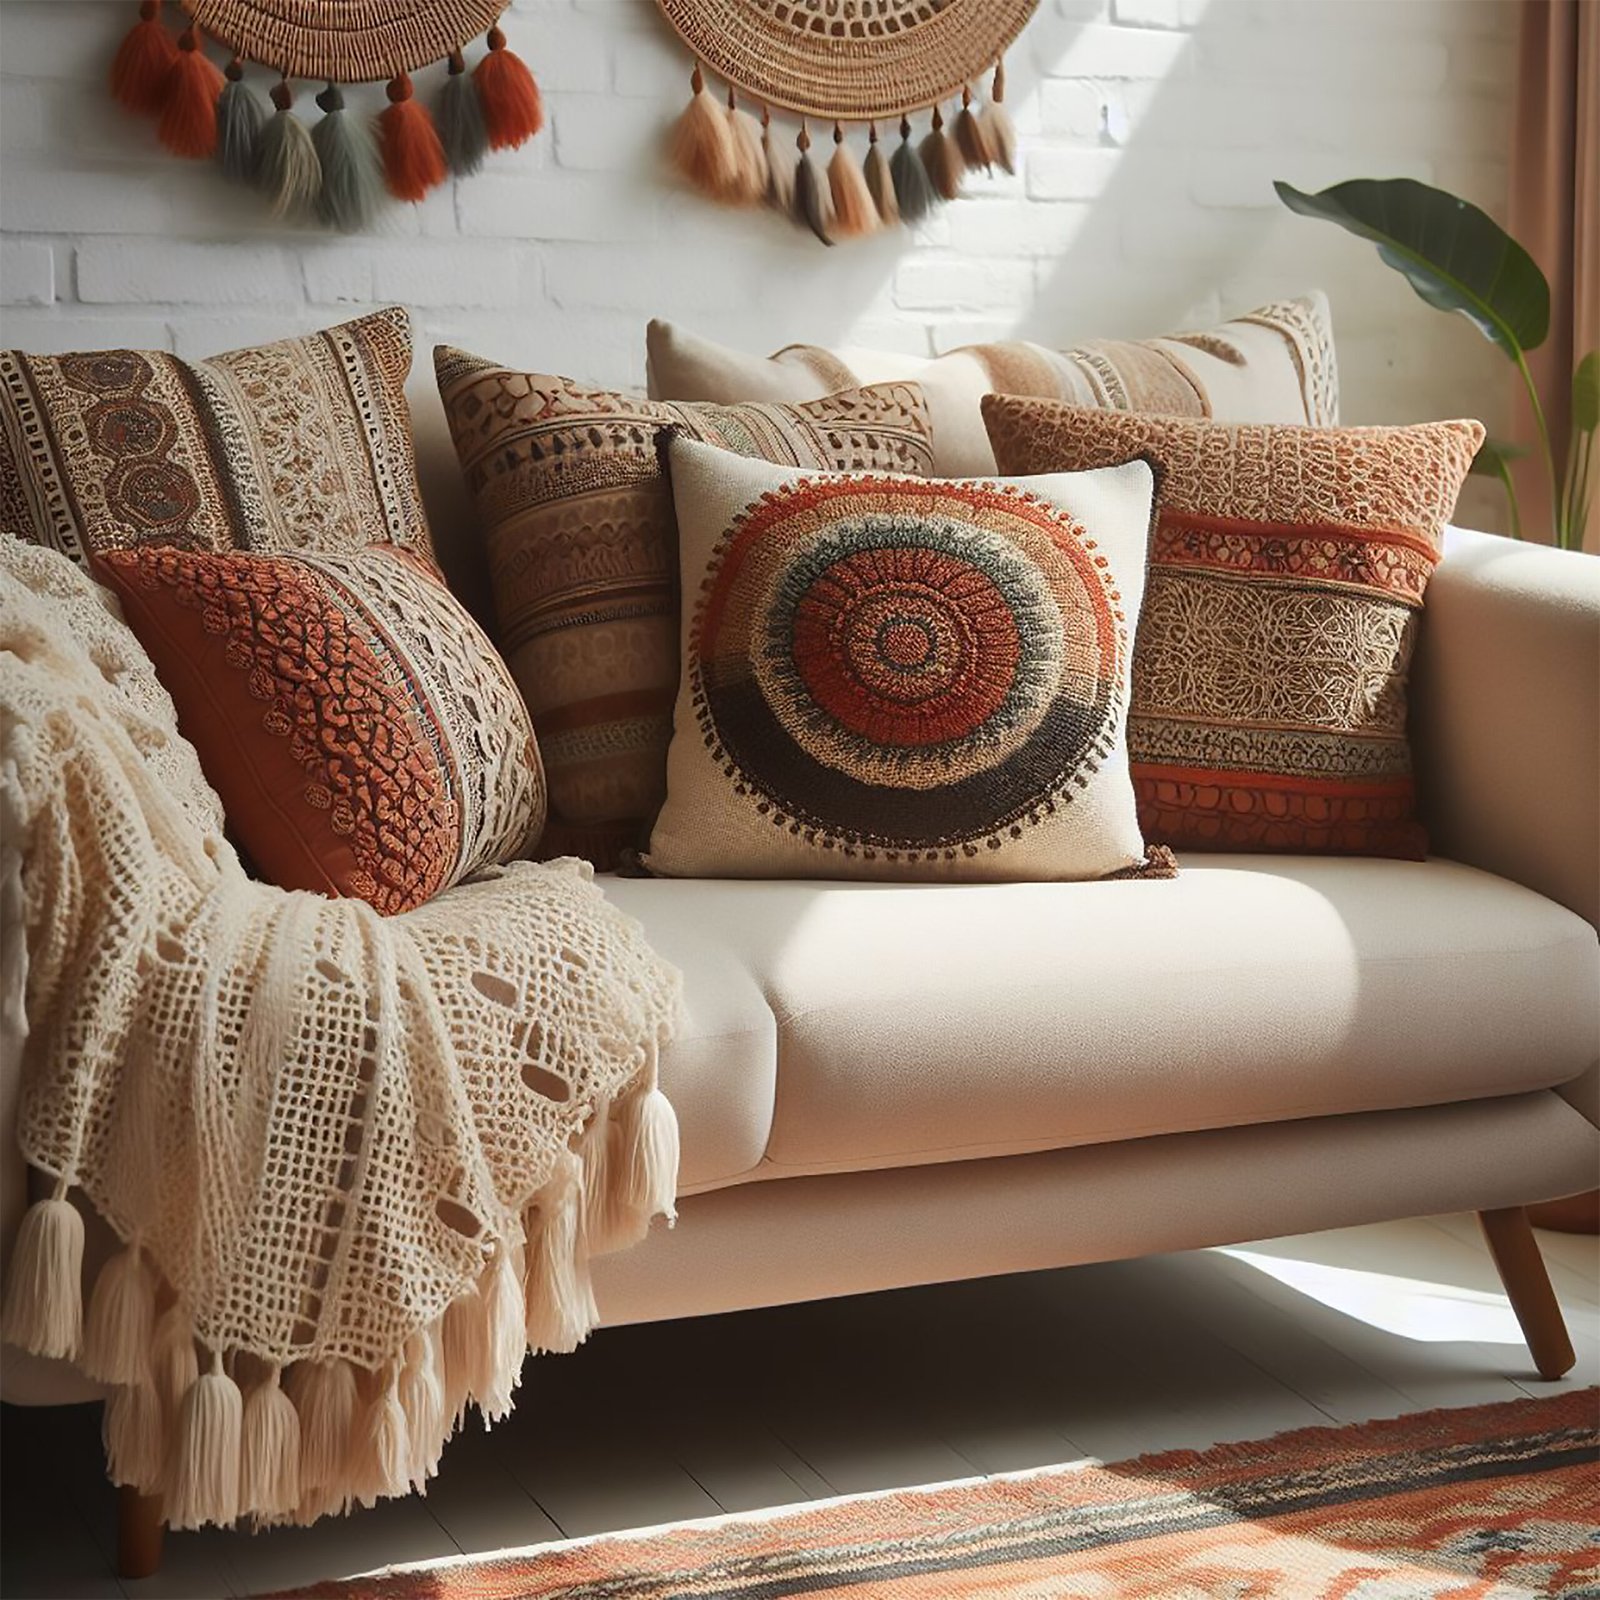 Living room with lots of pillows in different patterns and textures. 